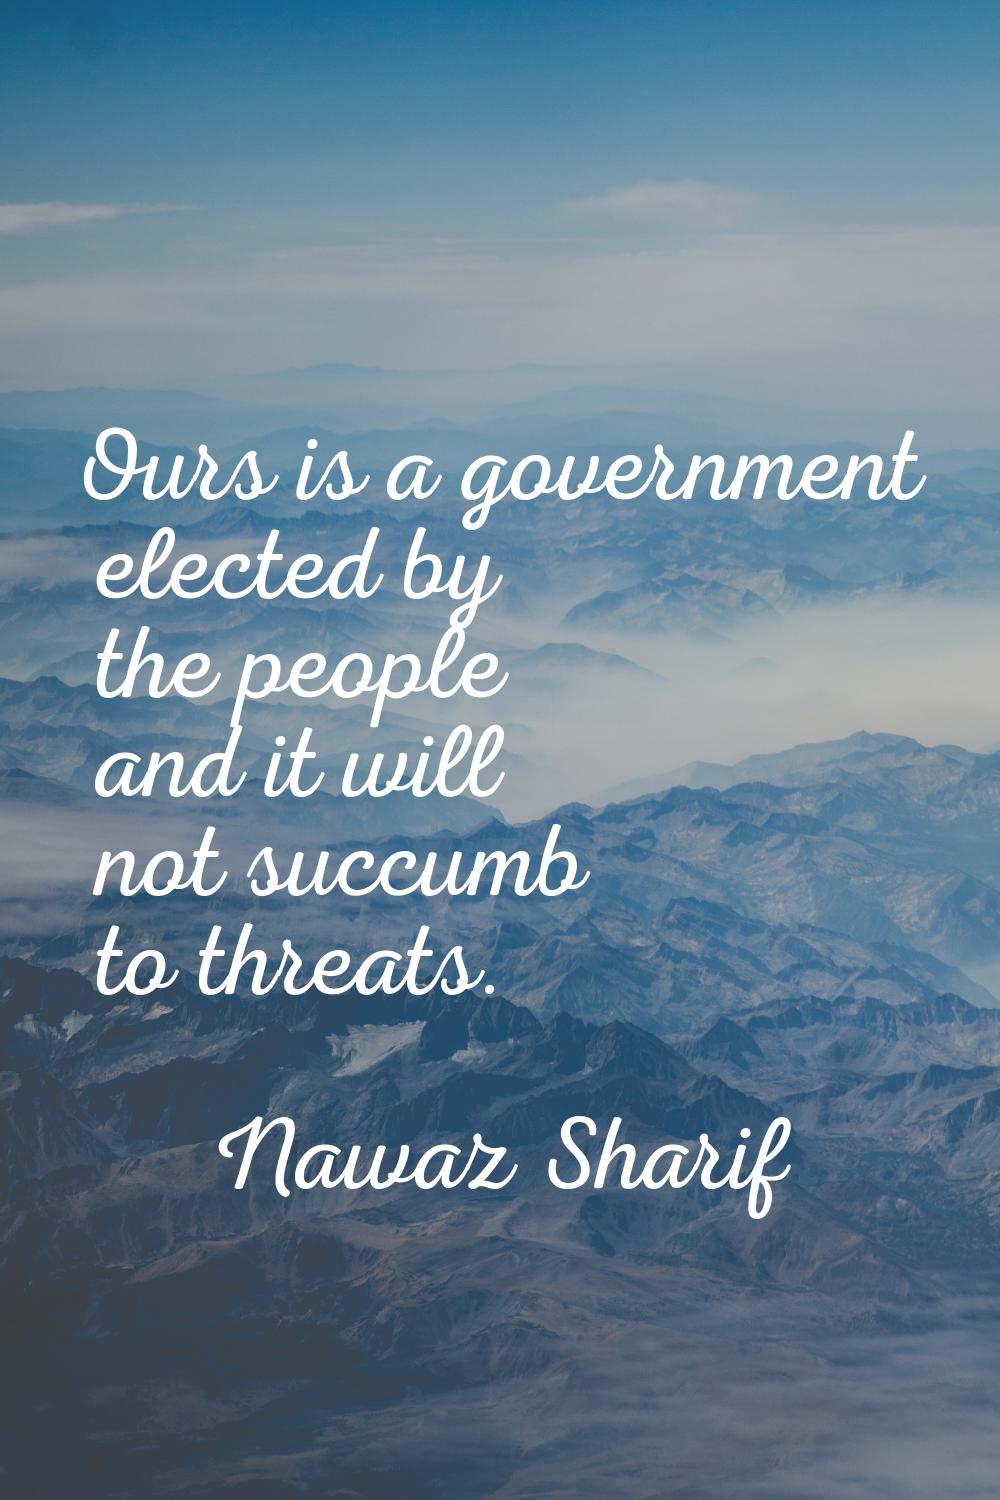 Ours is a government elected by the people and it will not succumb to threats.